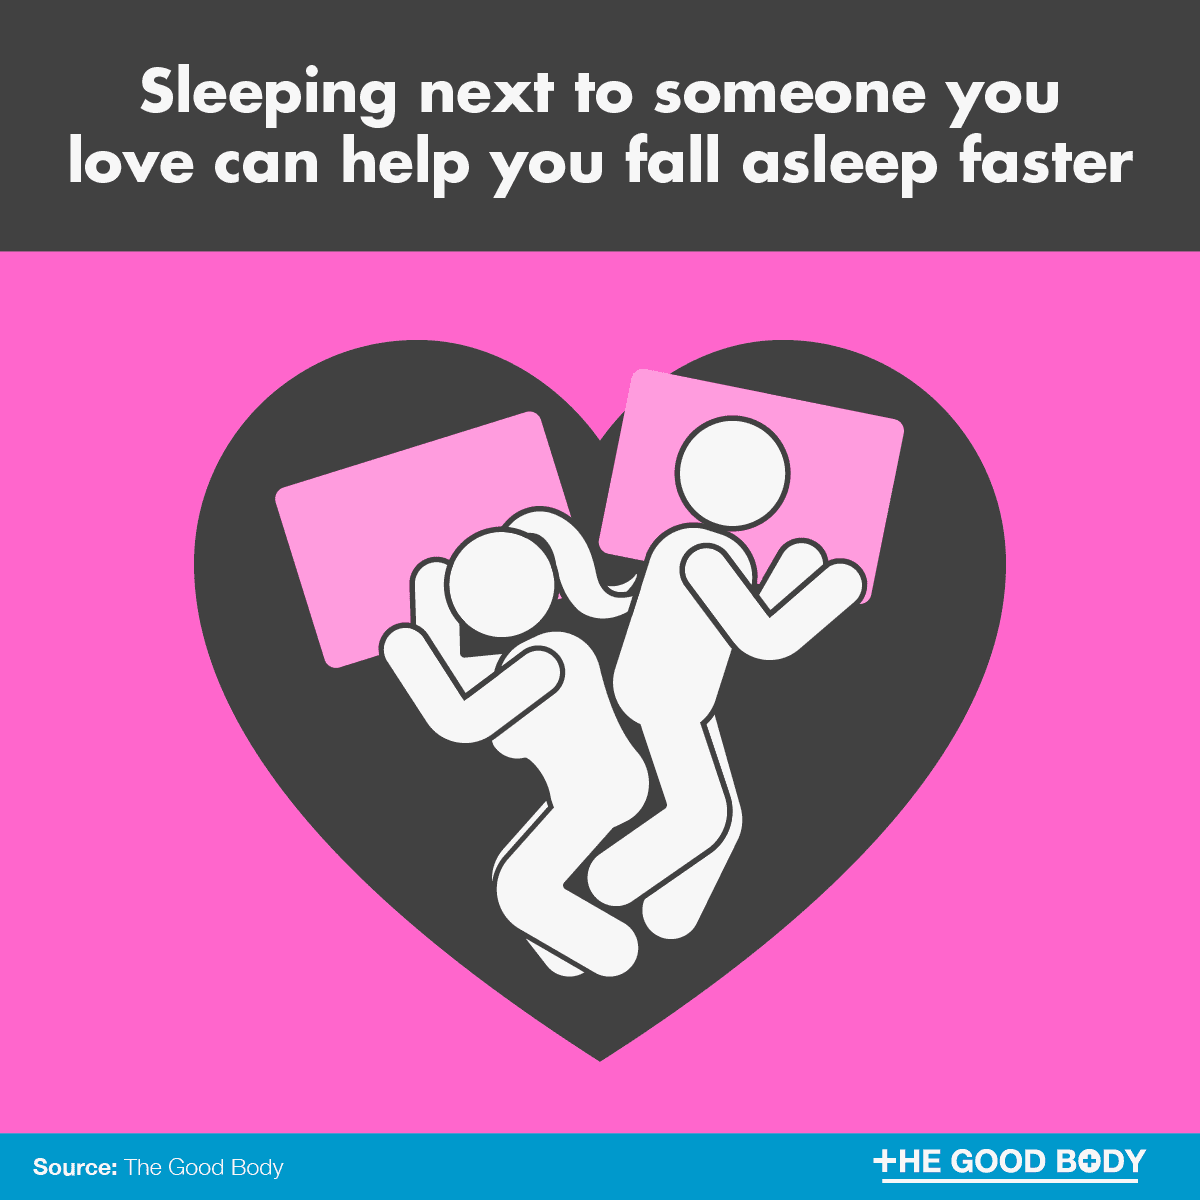 Sleeping next to someone you love can help you fall asleep faster